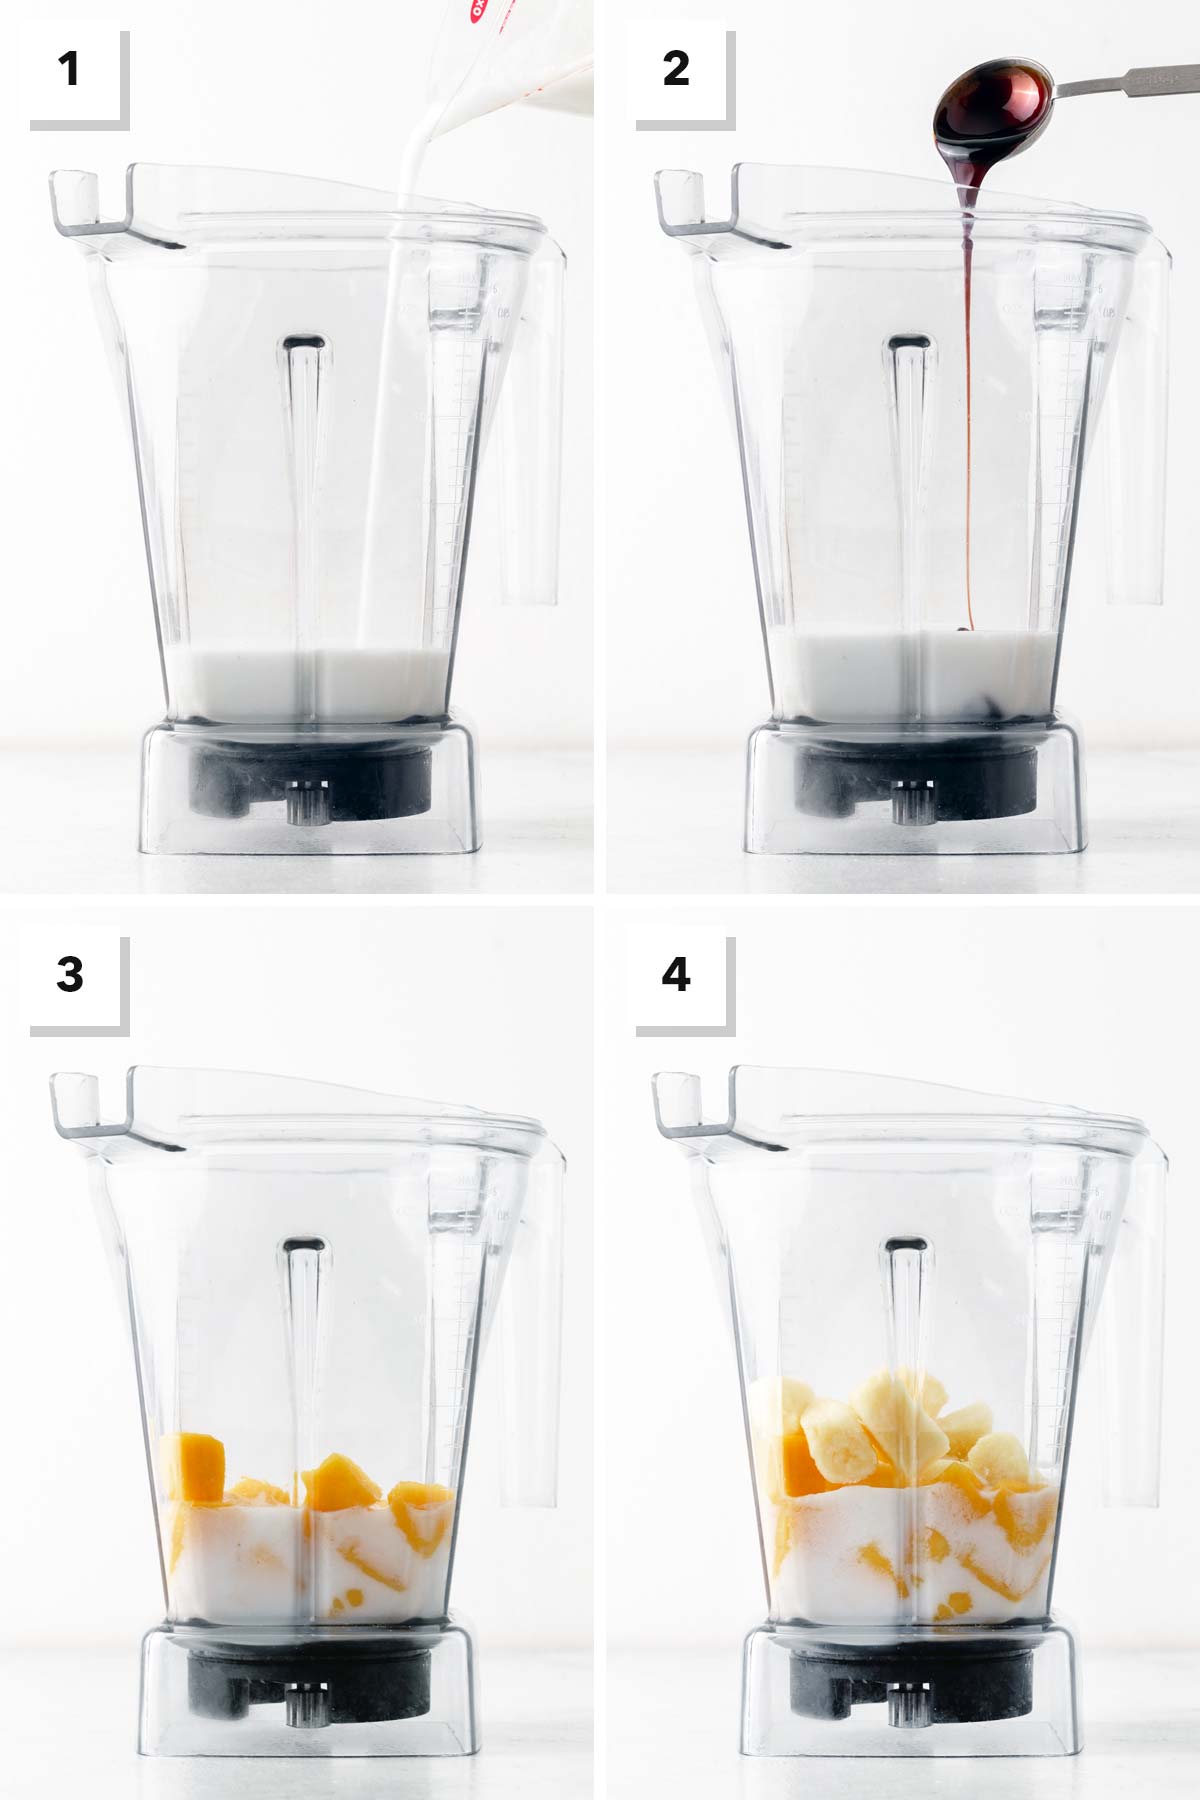 Tropical smoothie step-by-step photos.